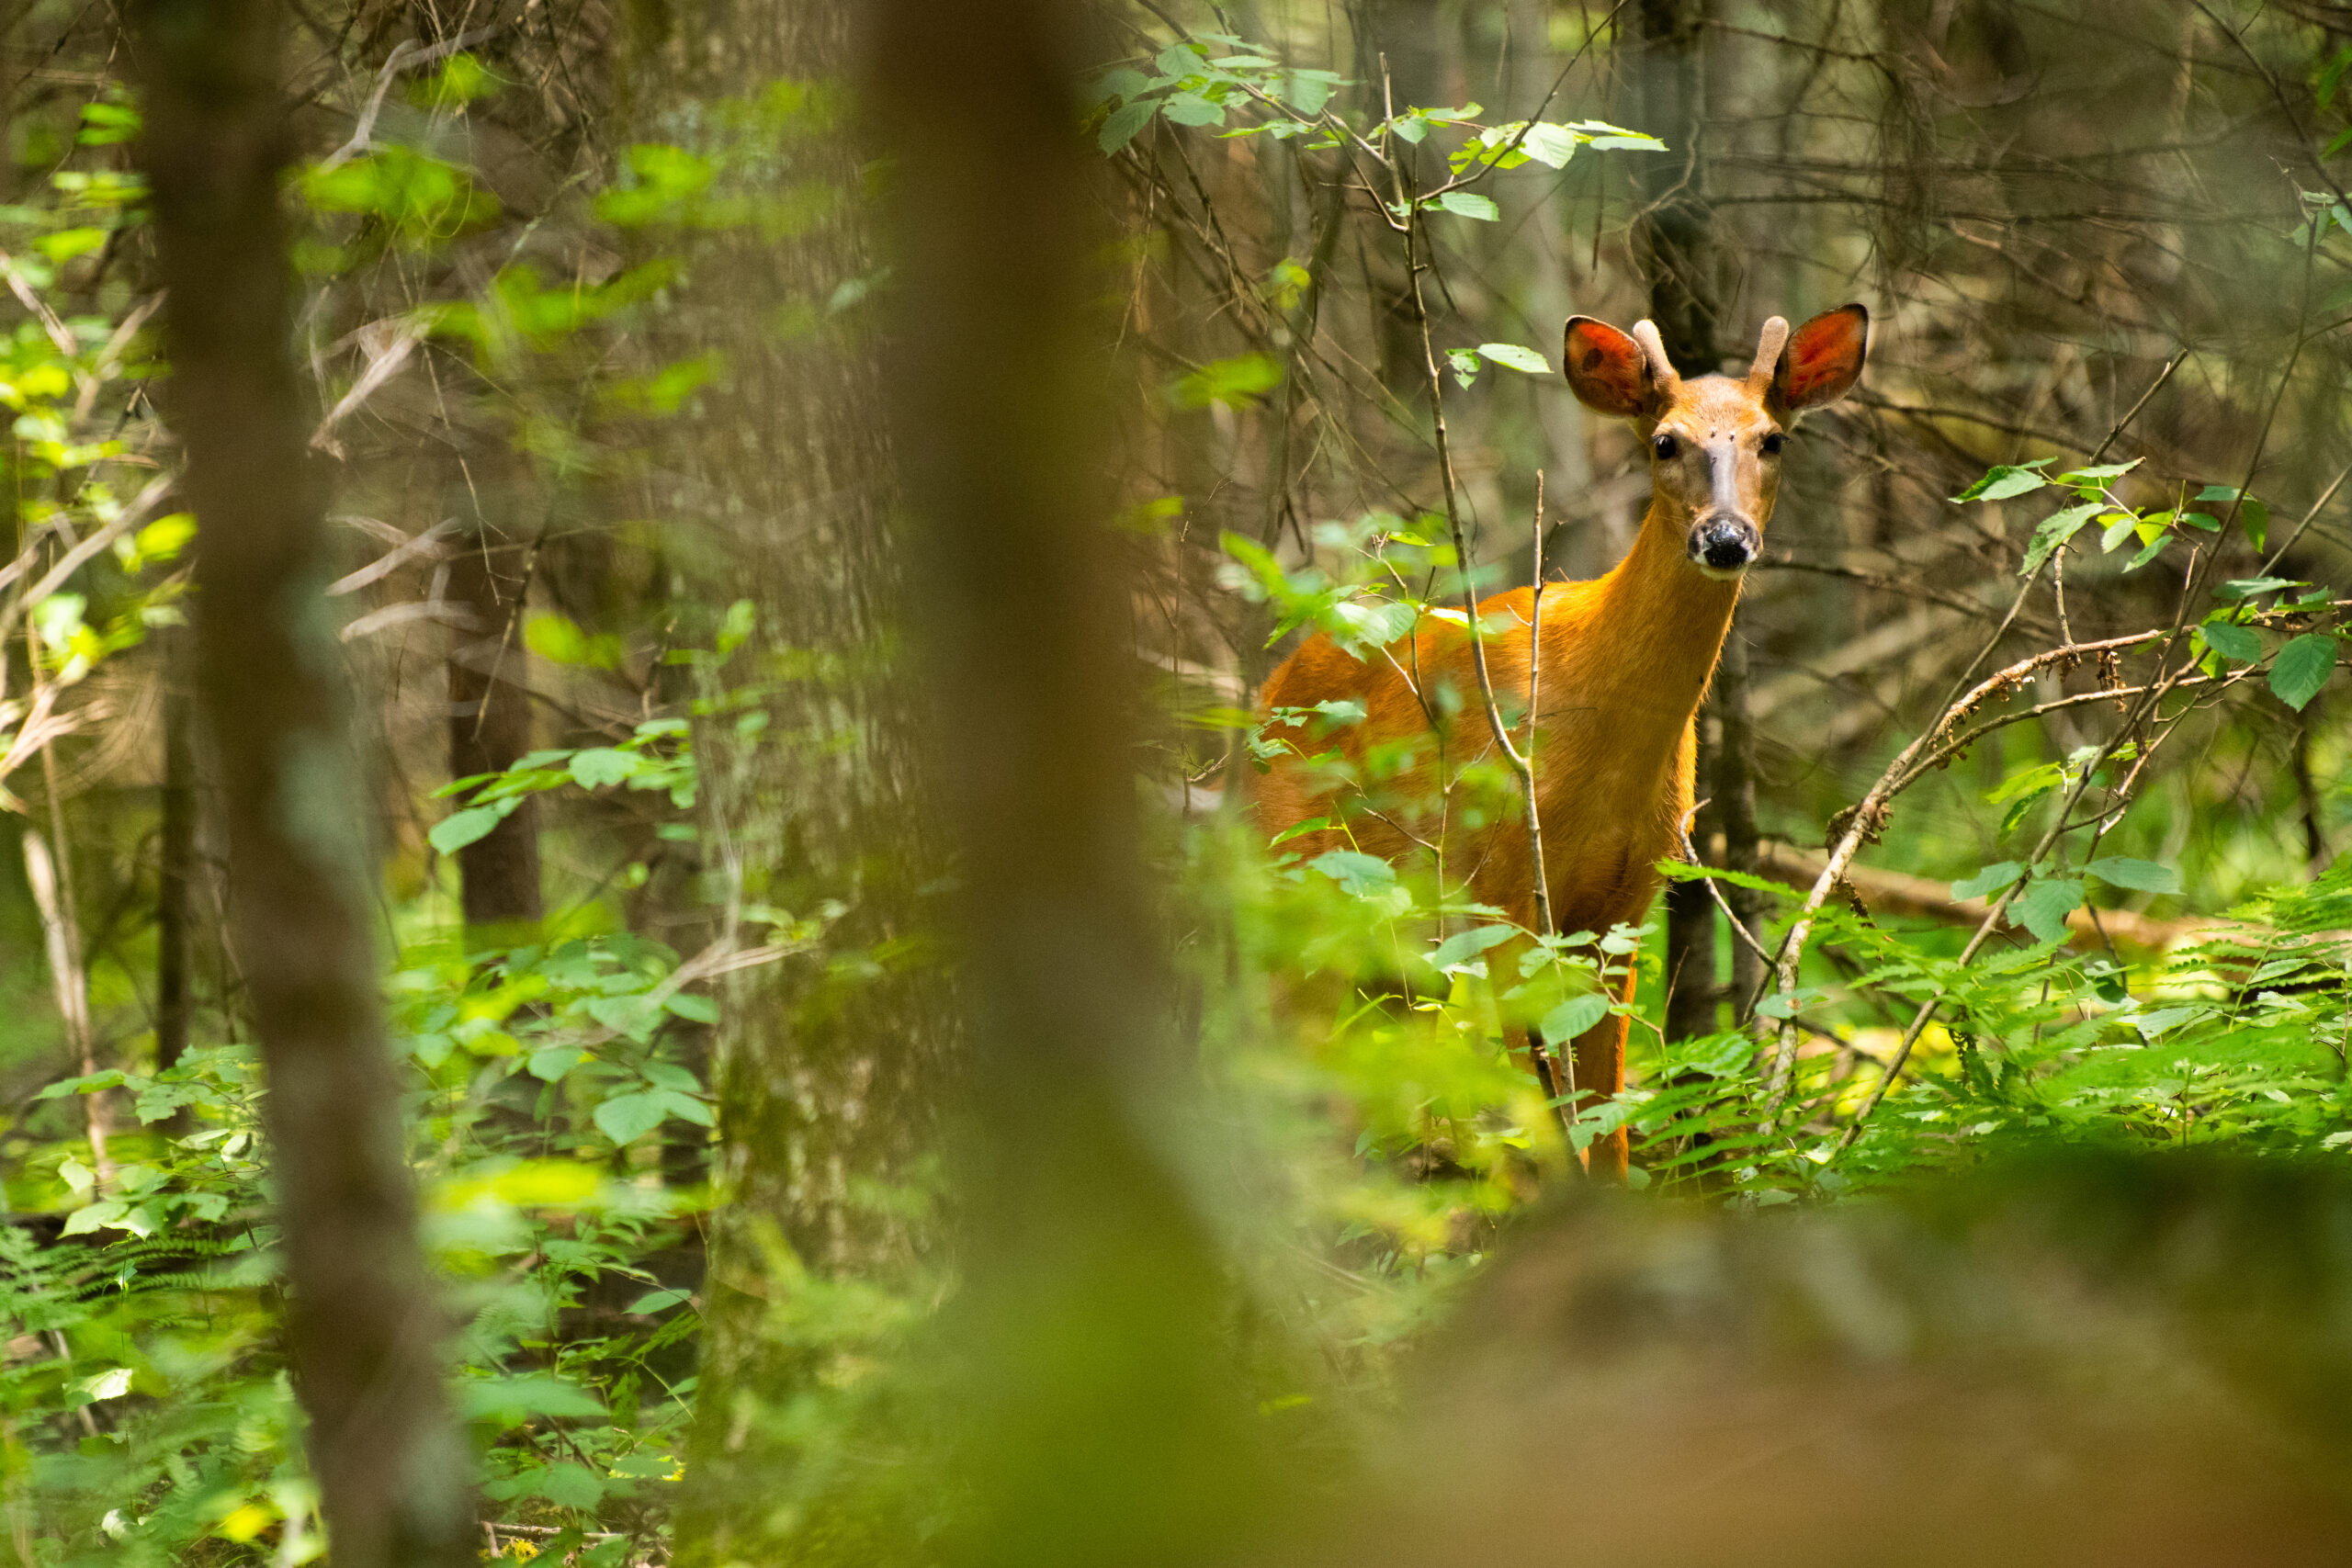 A young buck just starting to grow antlers peeks out from a lush green forest in Pelican River